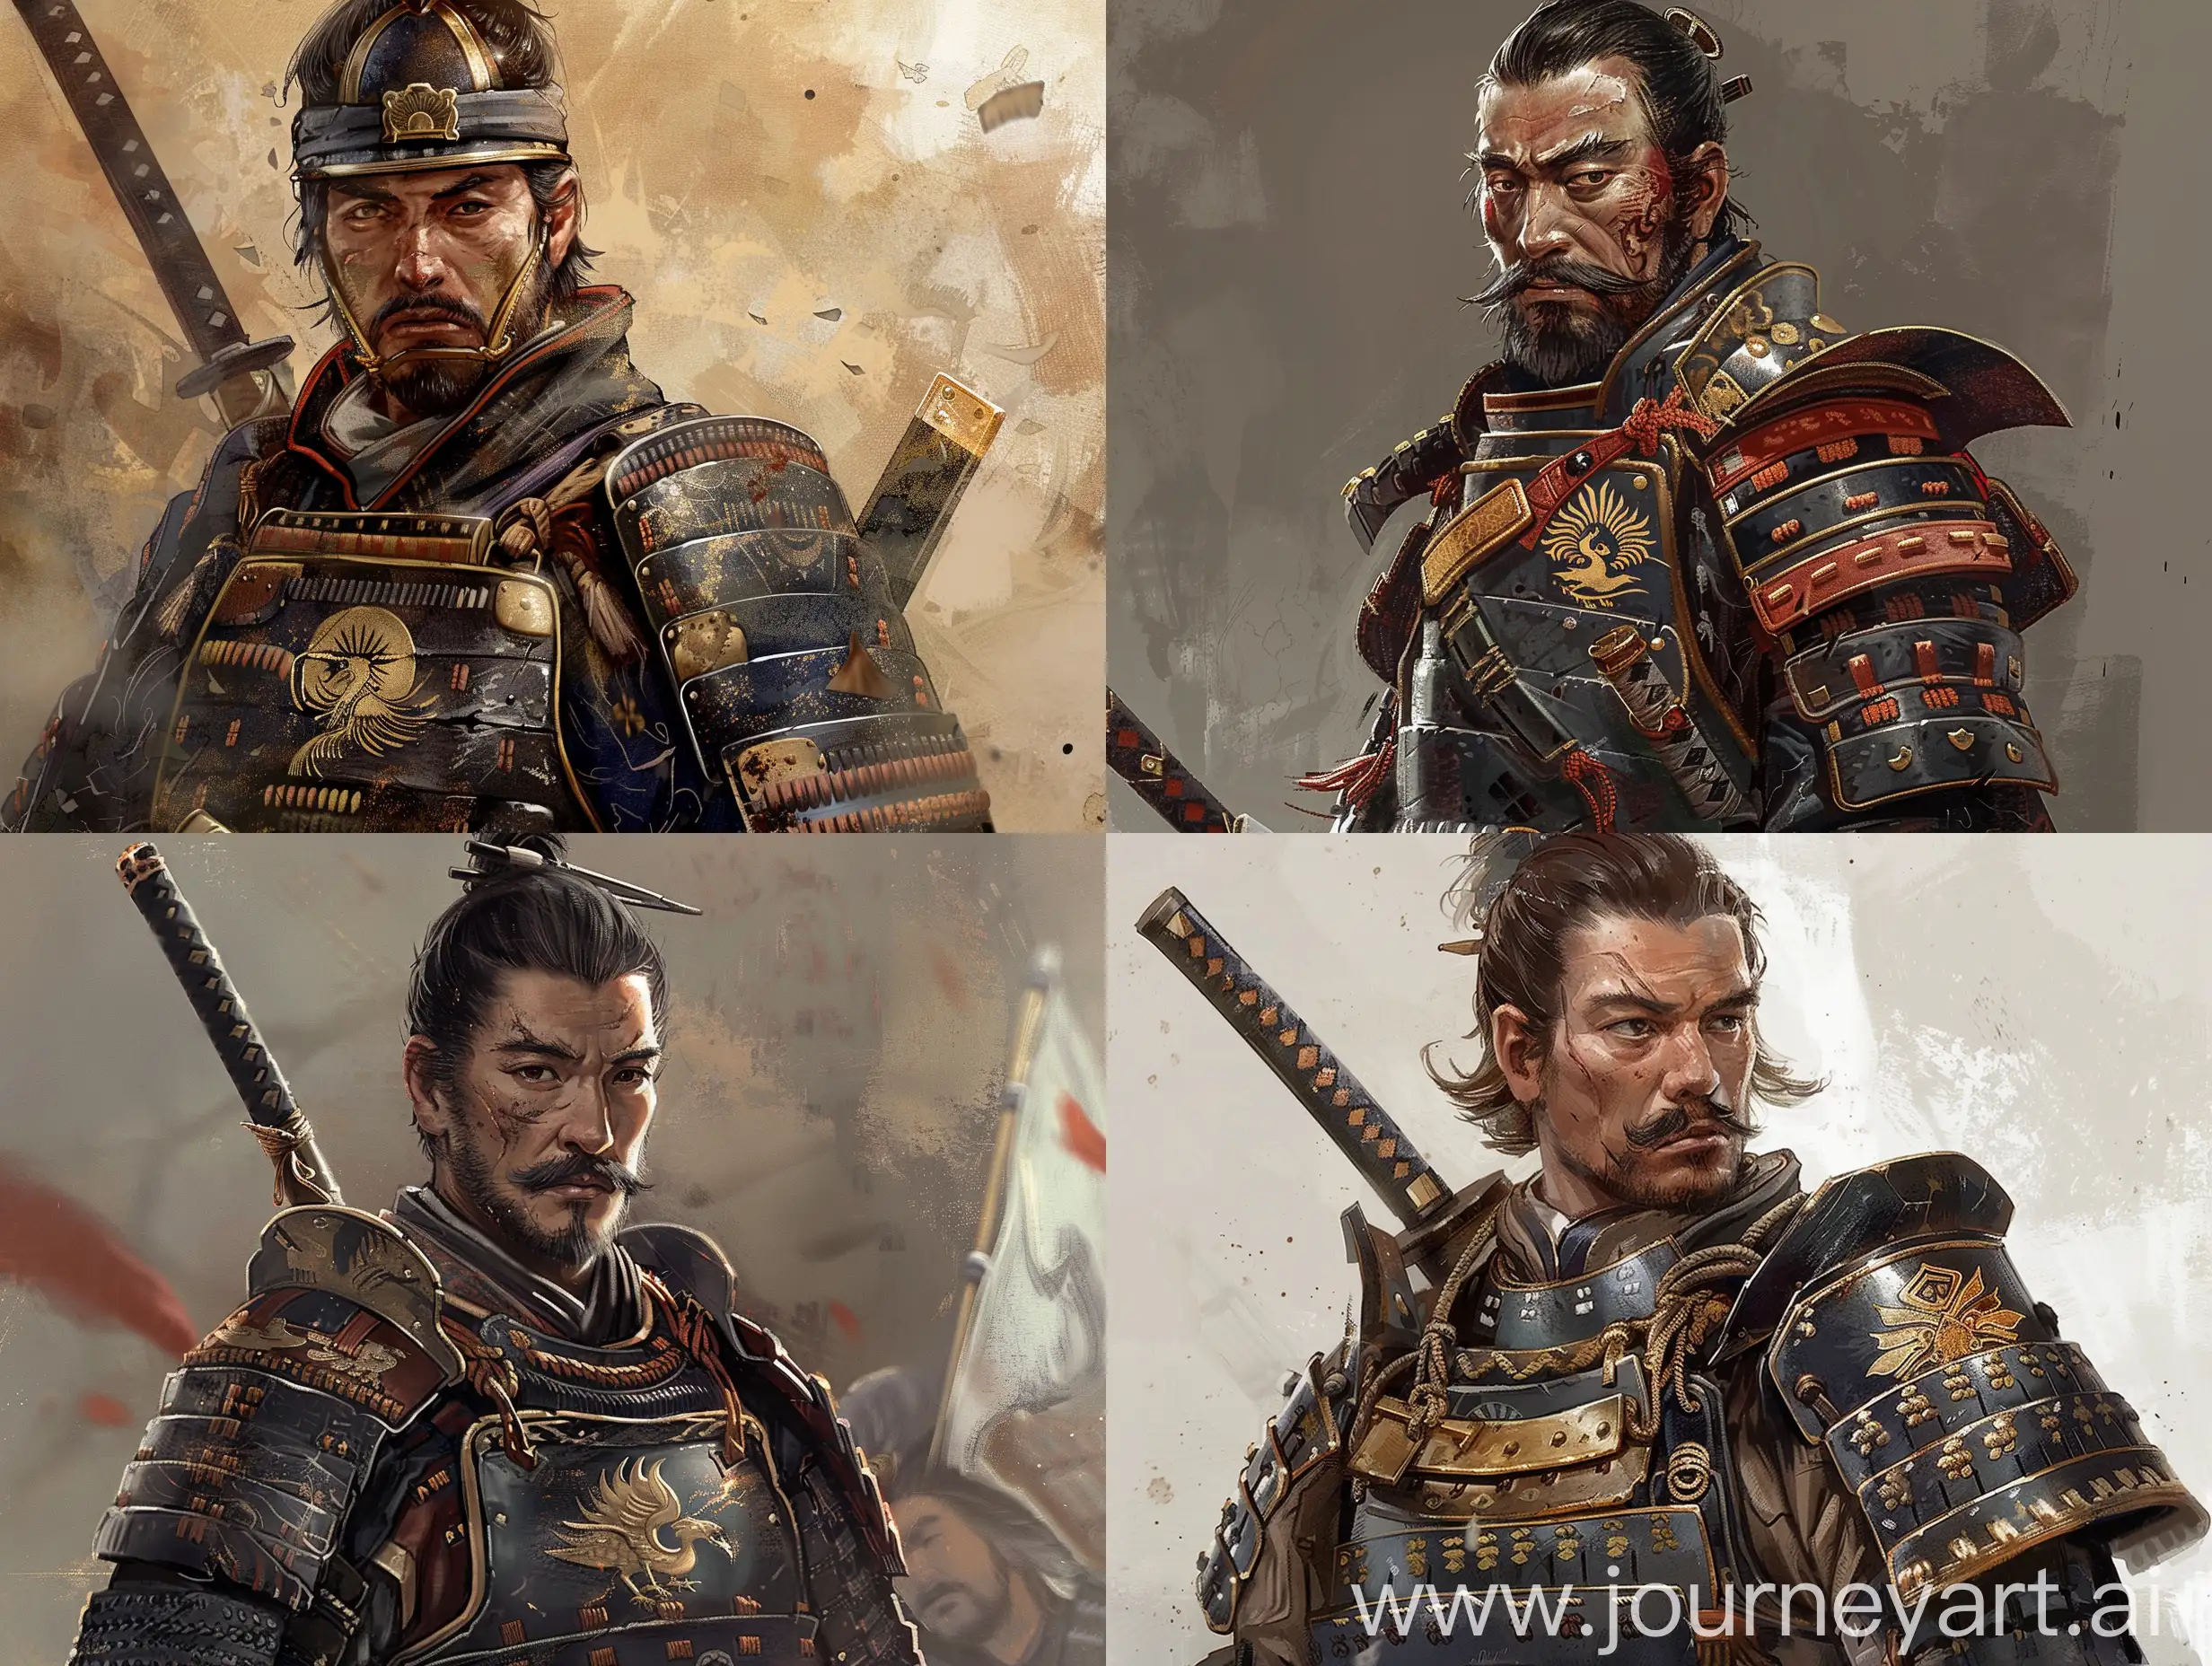 A portrait of a sengoku jidai samurai in armor with a matchlock teppo and an armor with a Phoenix crest, in the style of Nobunaga's Ambition character portraits.